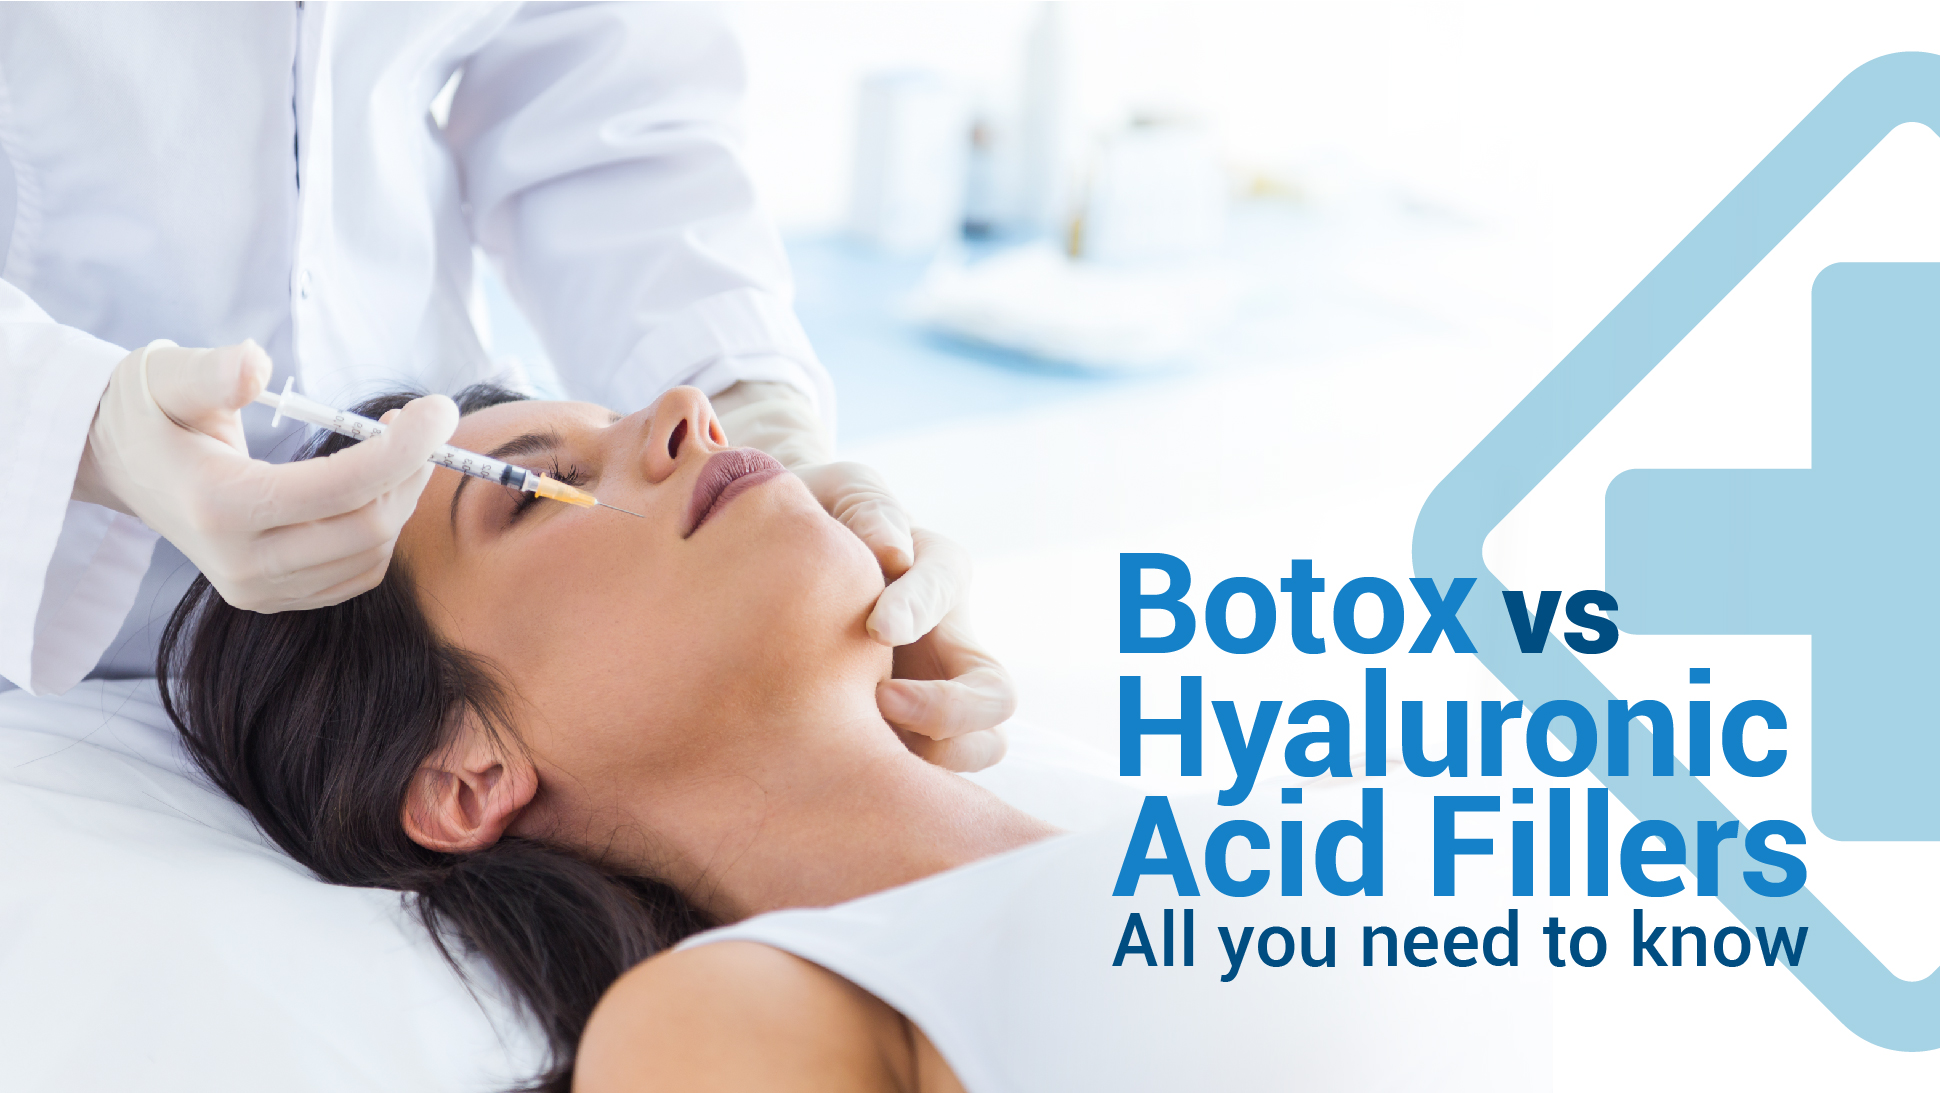 Botox vs Hyaluronic Acid Fillers: Here’s Everything You Need to Know!